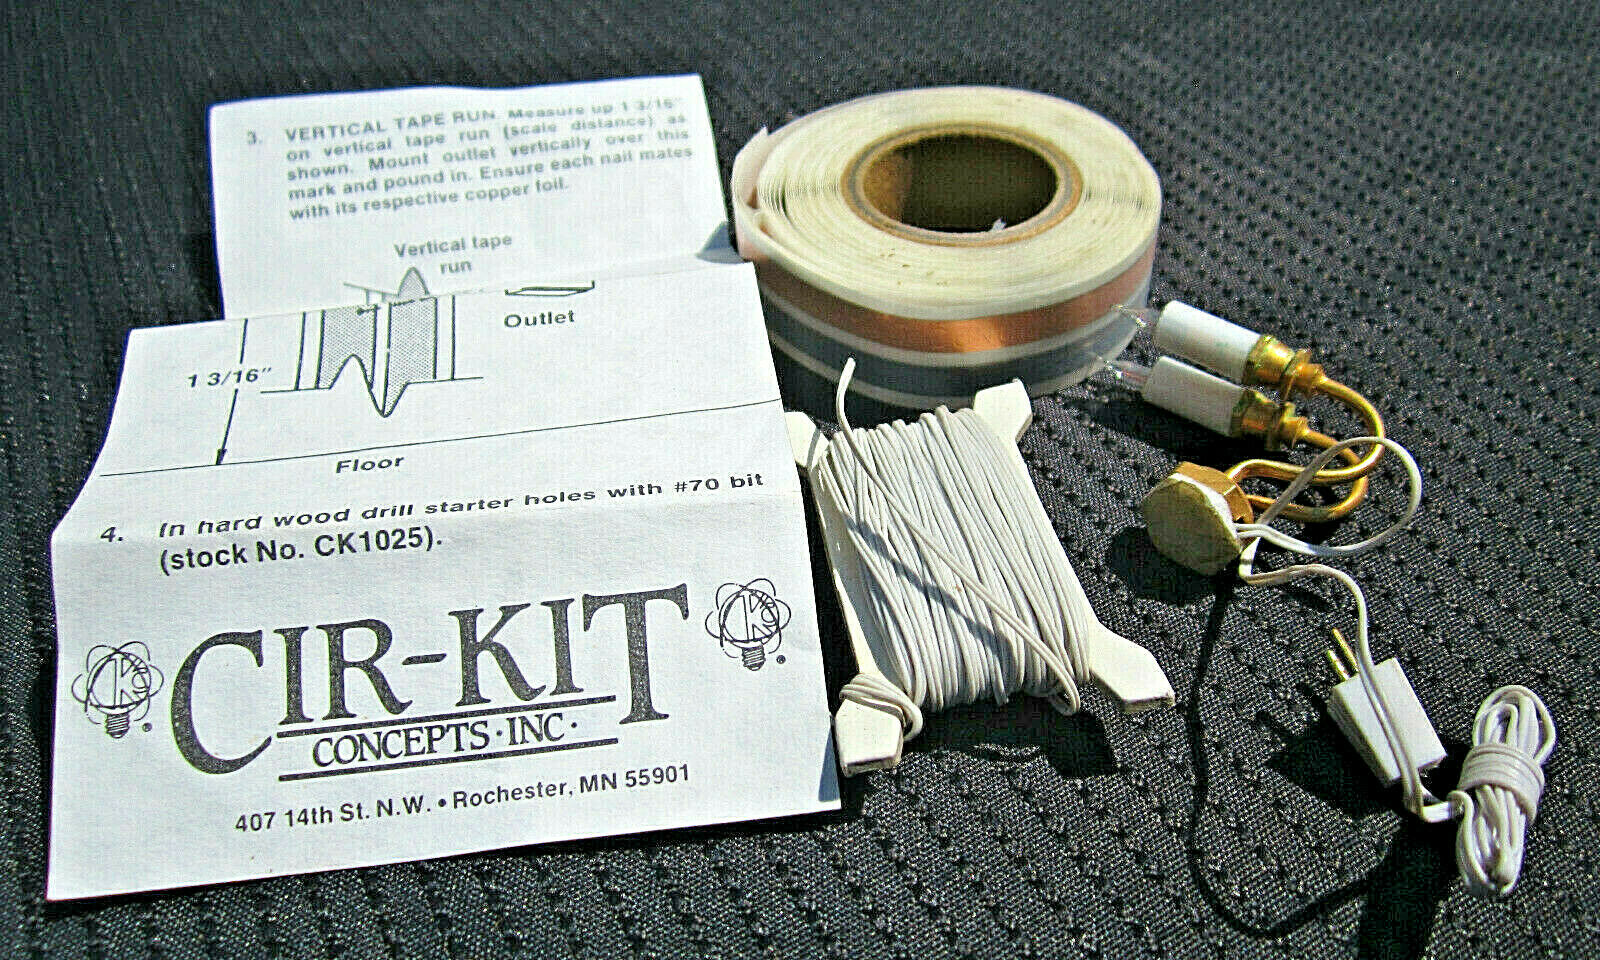 Cir-kit Concepts Conductor Tape Wire, Wire, & Wall Light Fixture For Miniature